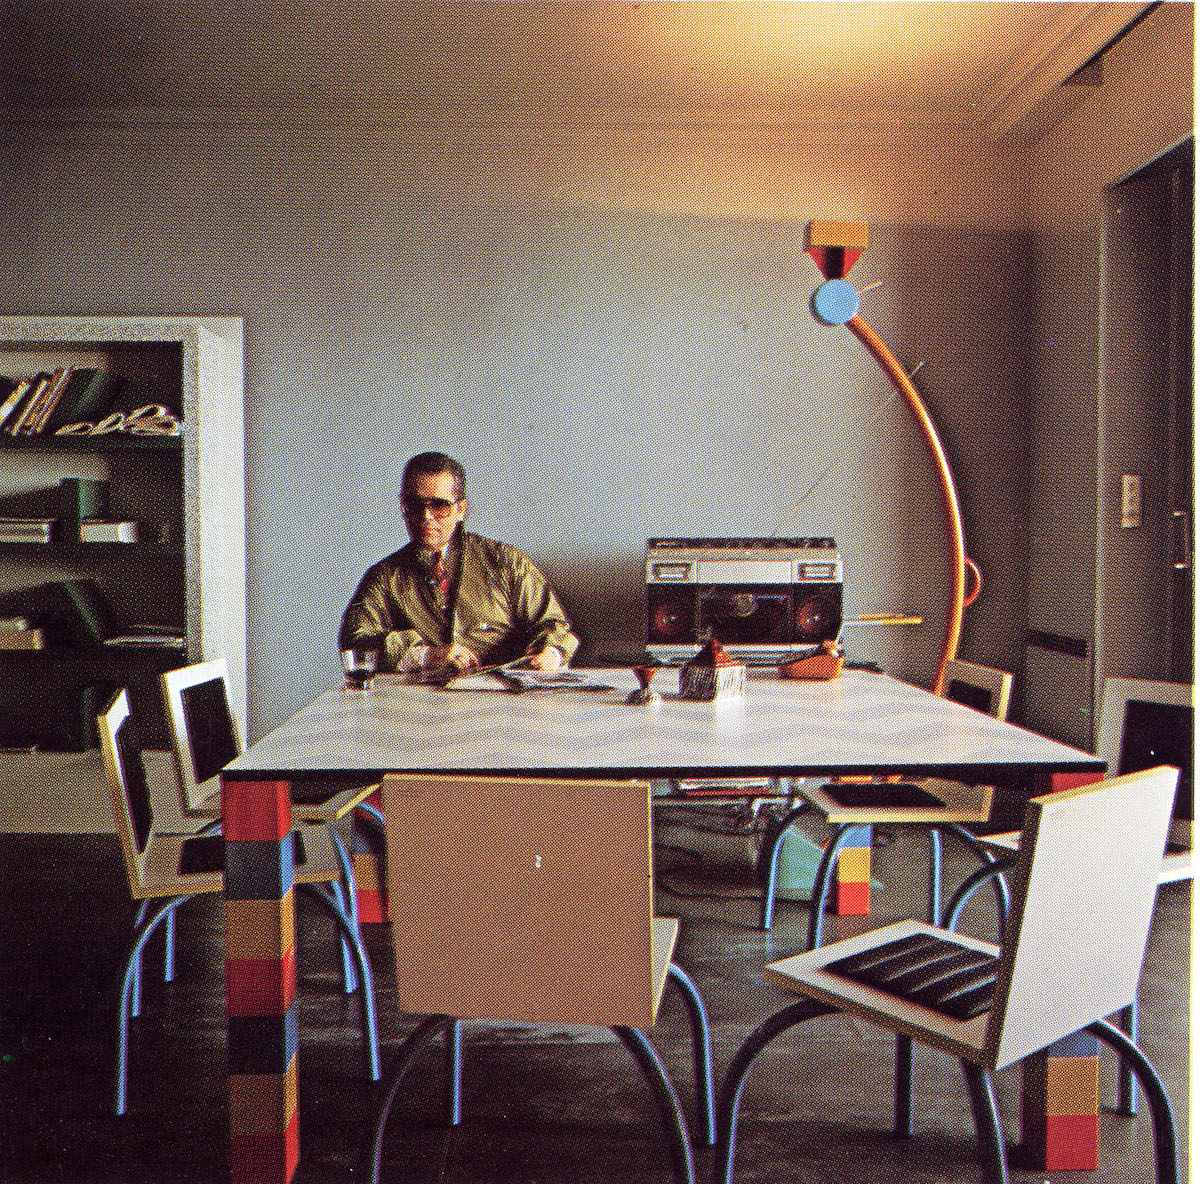 Karl Lagerfeld in his Monte Carlo apartment. “Pierre” table by Sowden, “Riviera” chair by De Lucchi, “Treetops” lamp and “Suvretta bookcase by Sottsass. Ceramics by Matteo Thun. Memphis 1981. From the book Memphis, Research, Experience, Results, Failures and Successes of the New Design by Barbara Radice, ed Electa. Photo: Jaques Schumacher. Copyright Mode & Wohnen.